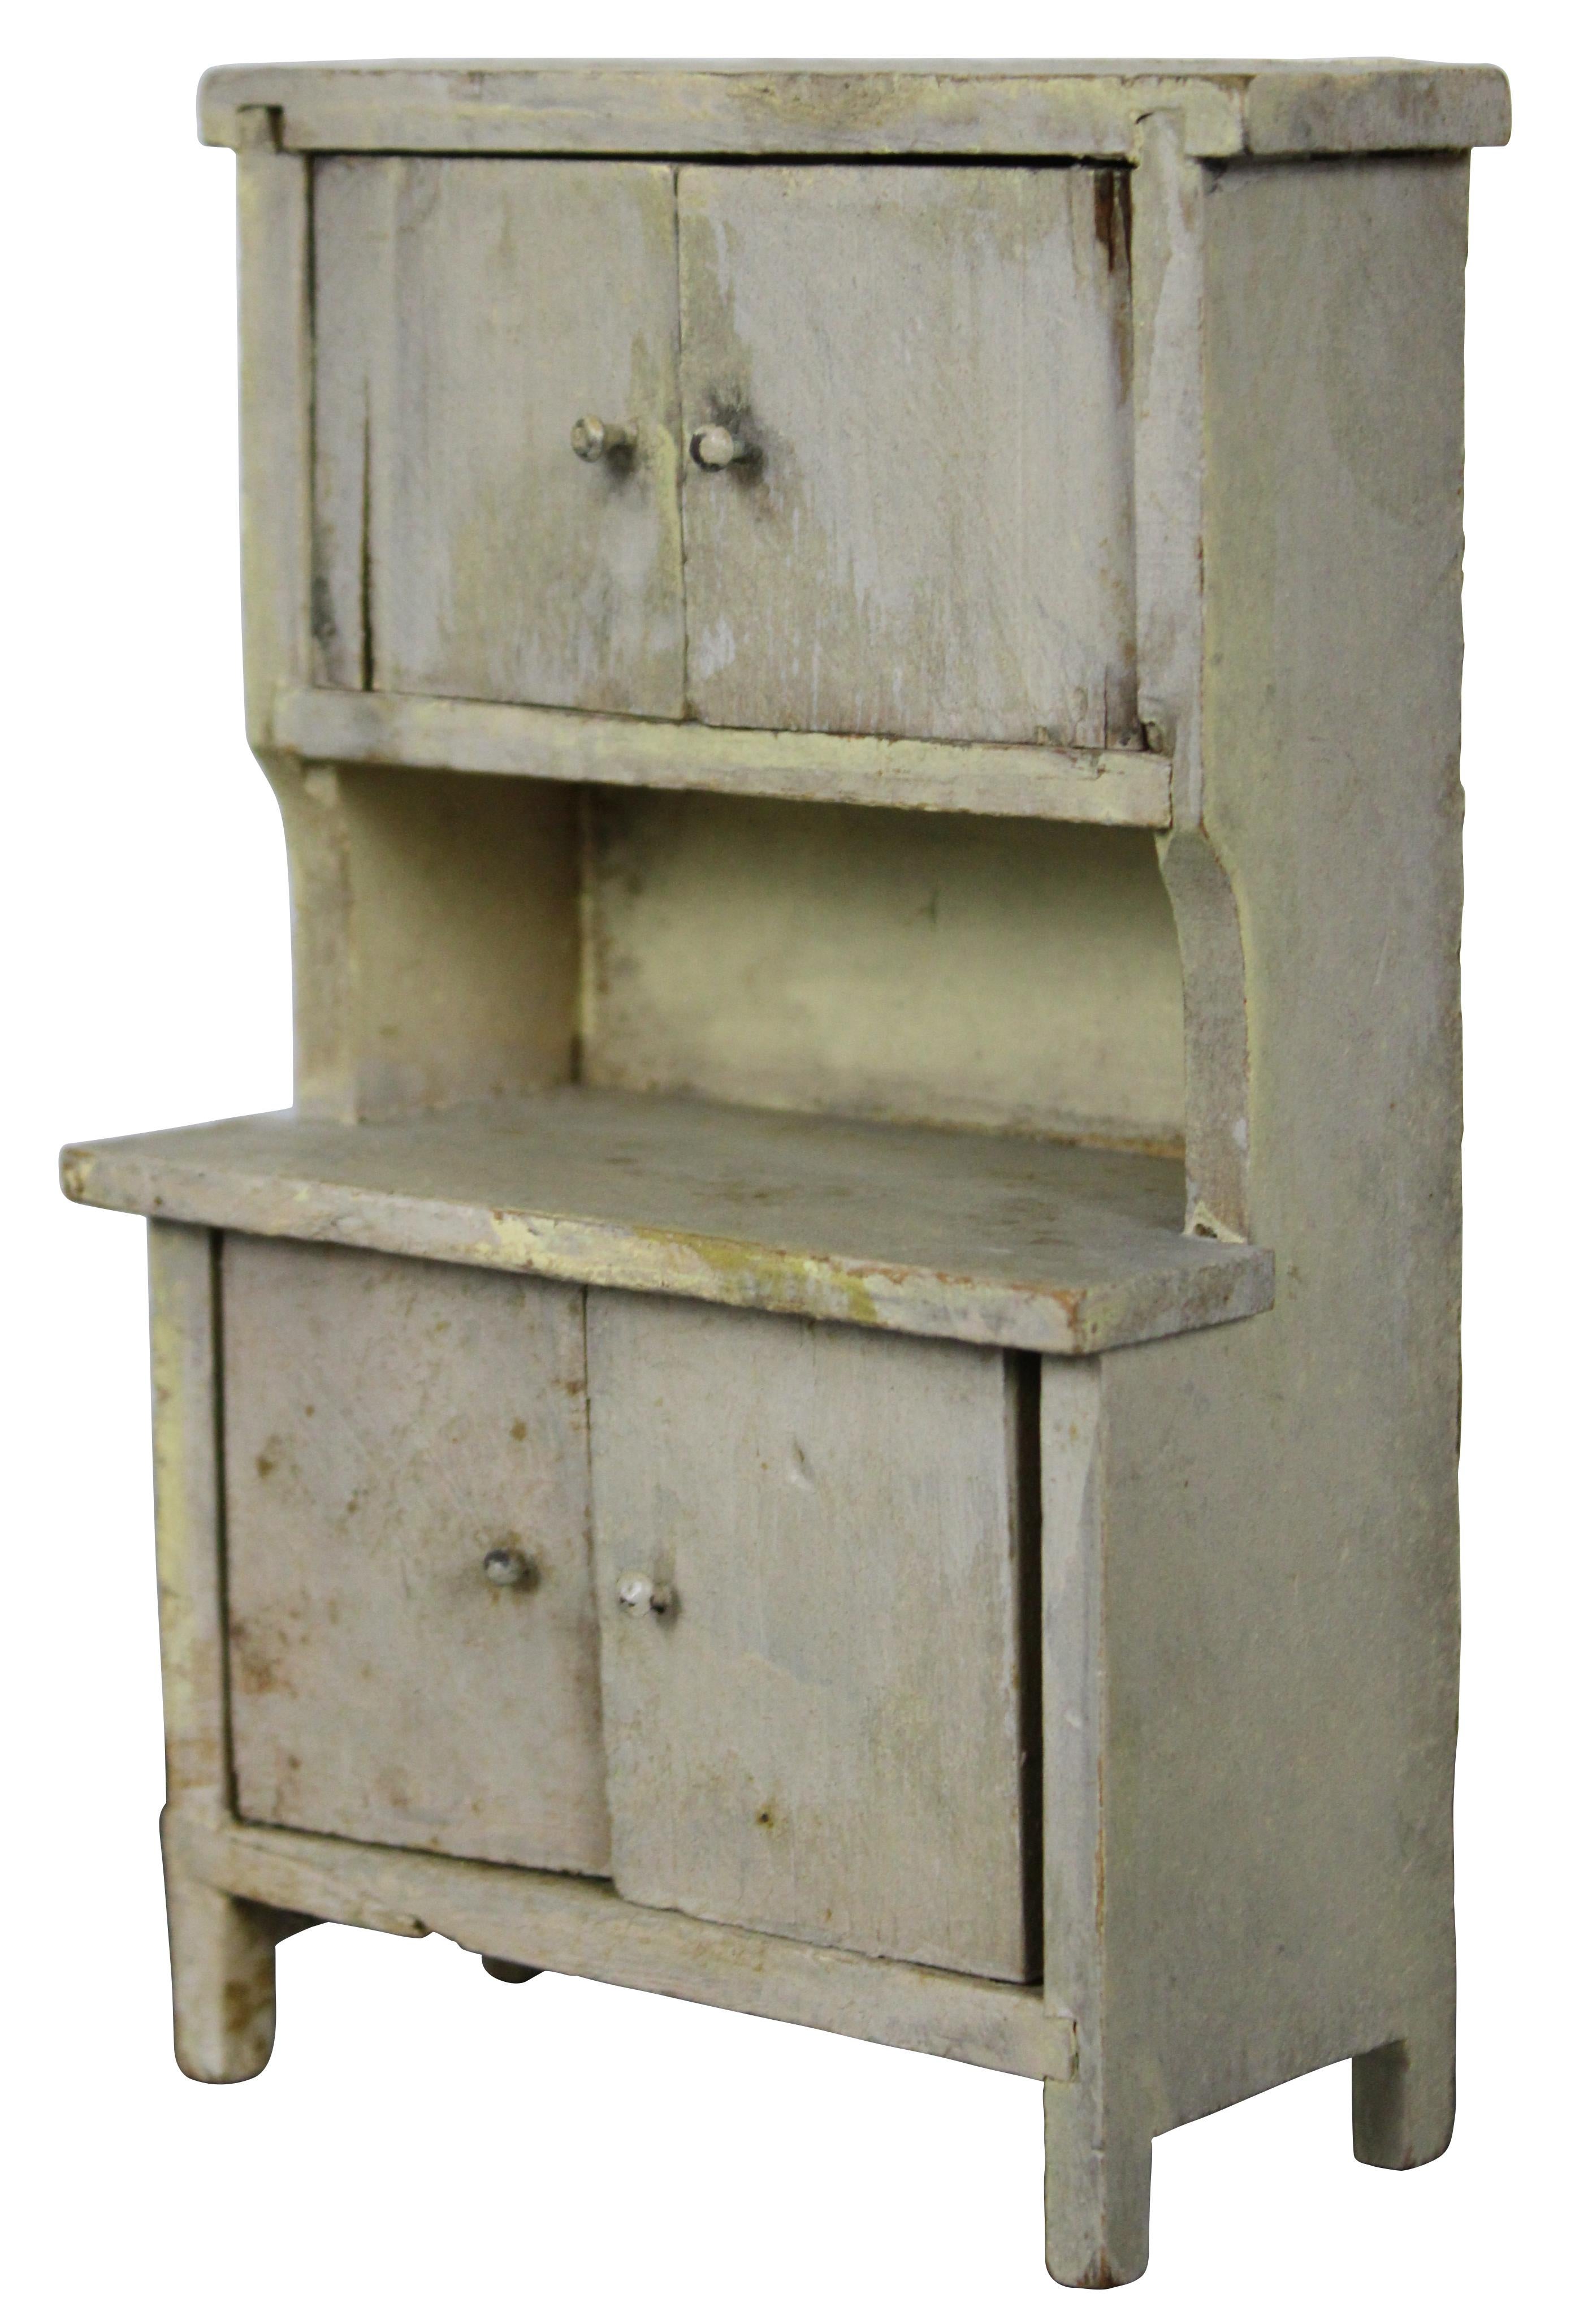 Antique early 20th century distressed white painted miniature dollhouse sized cupboard. Measure: 6